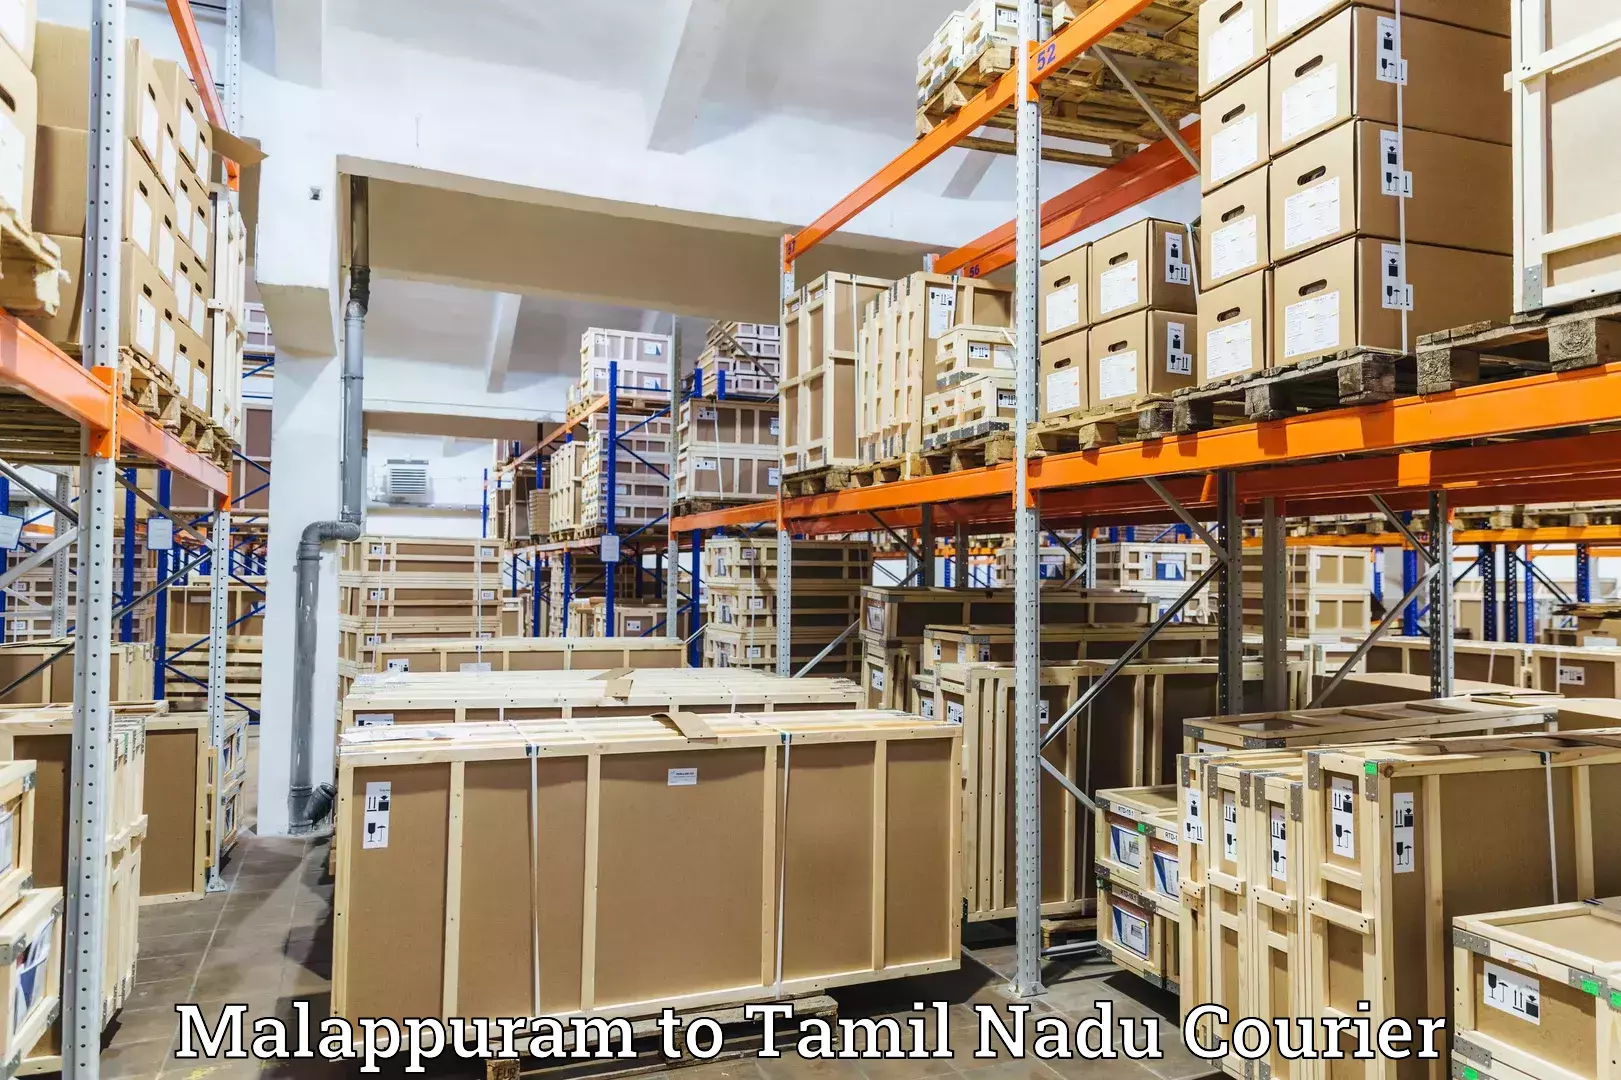 Reliable shipping partners Malappuram to Ennore Port Chennai